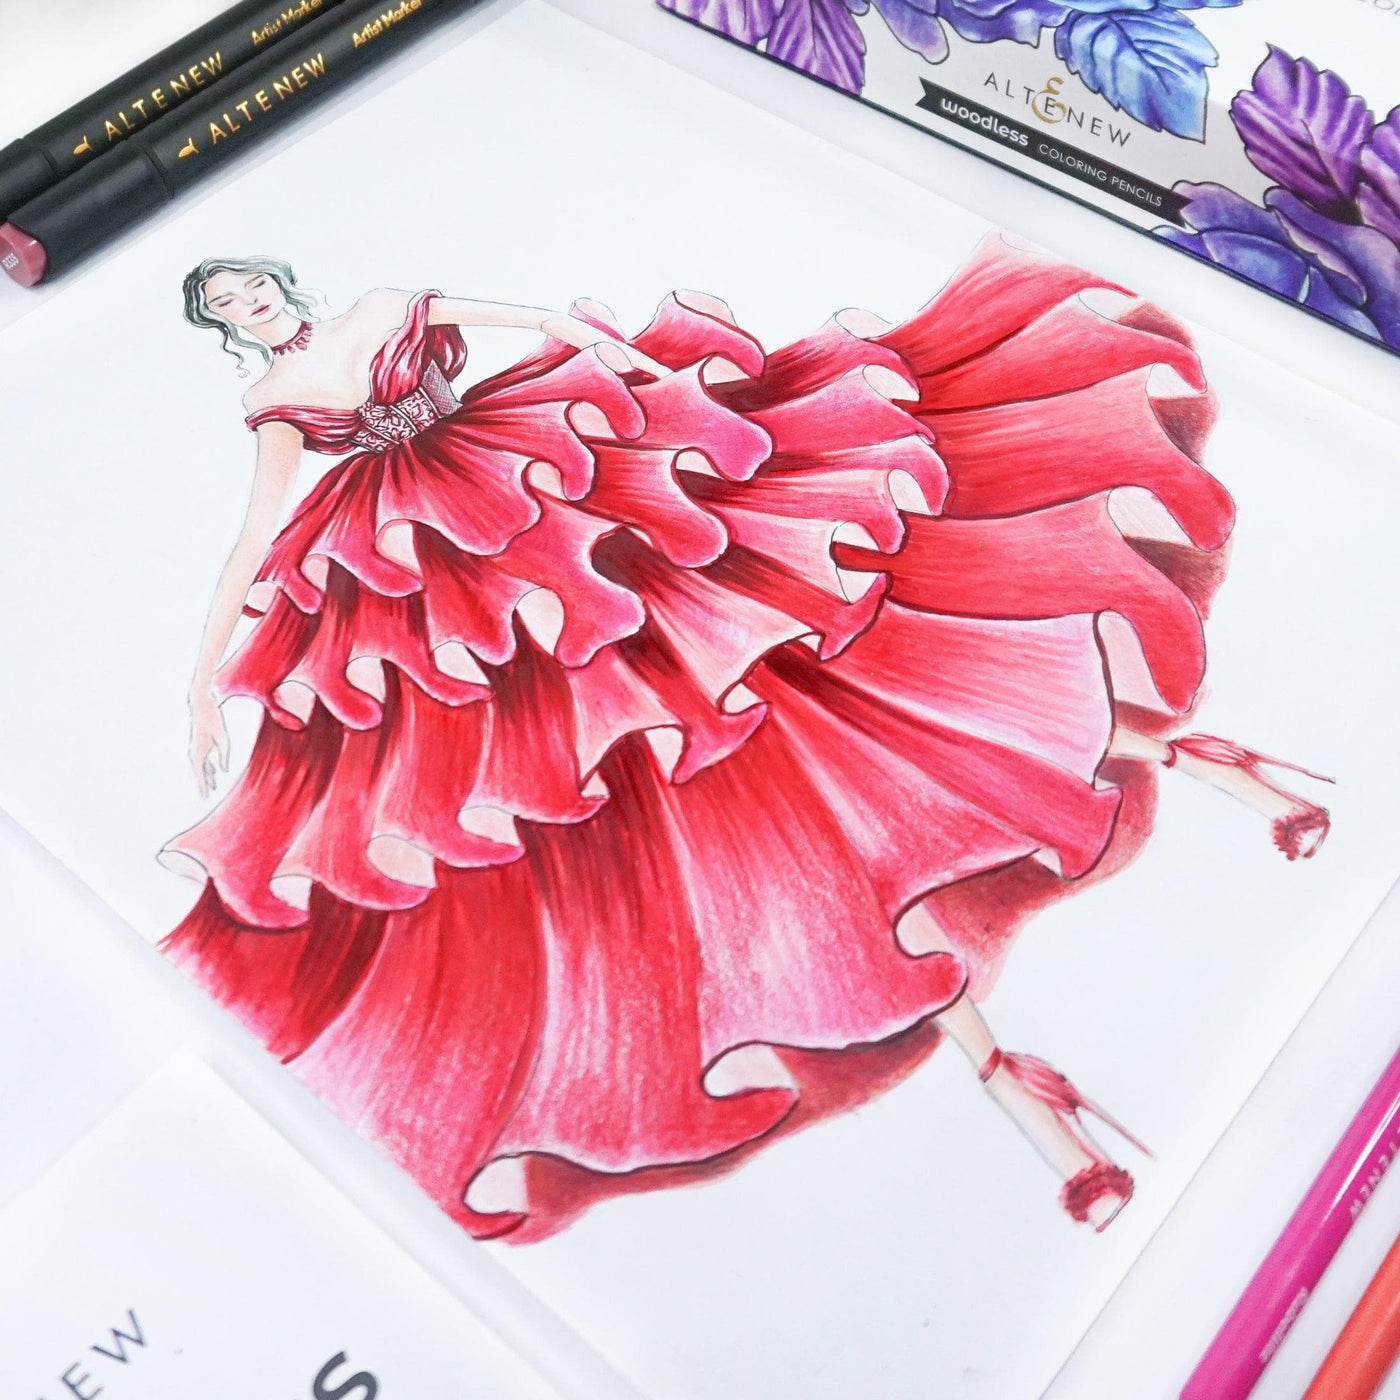 Artist Alcohol Markers Red Cosmos Set